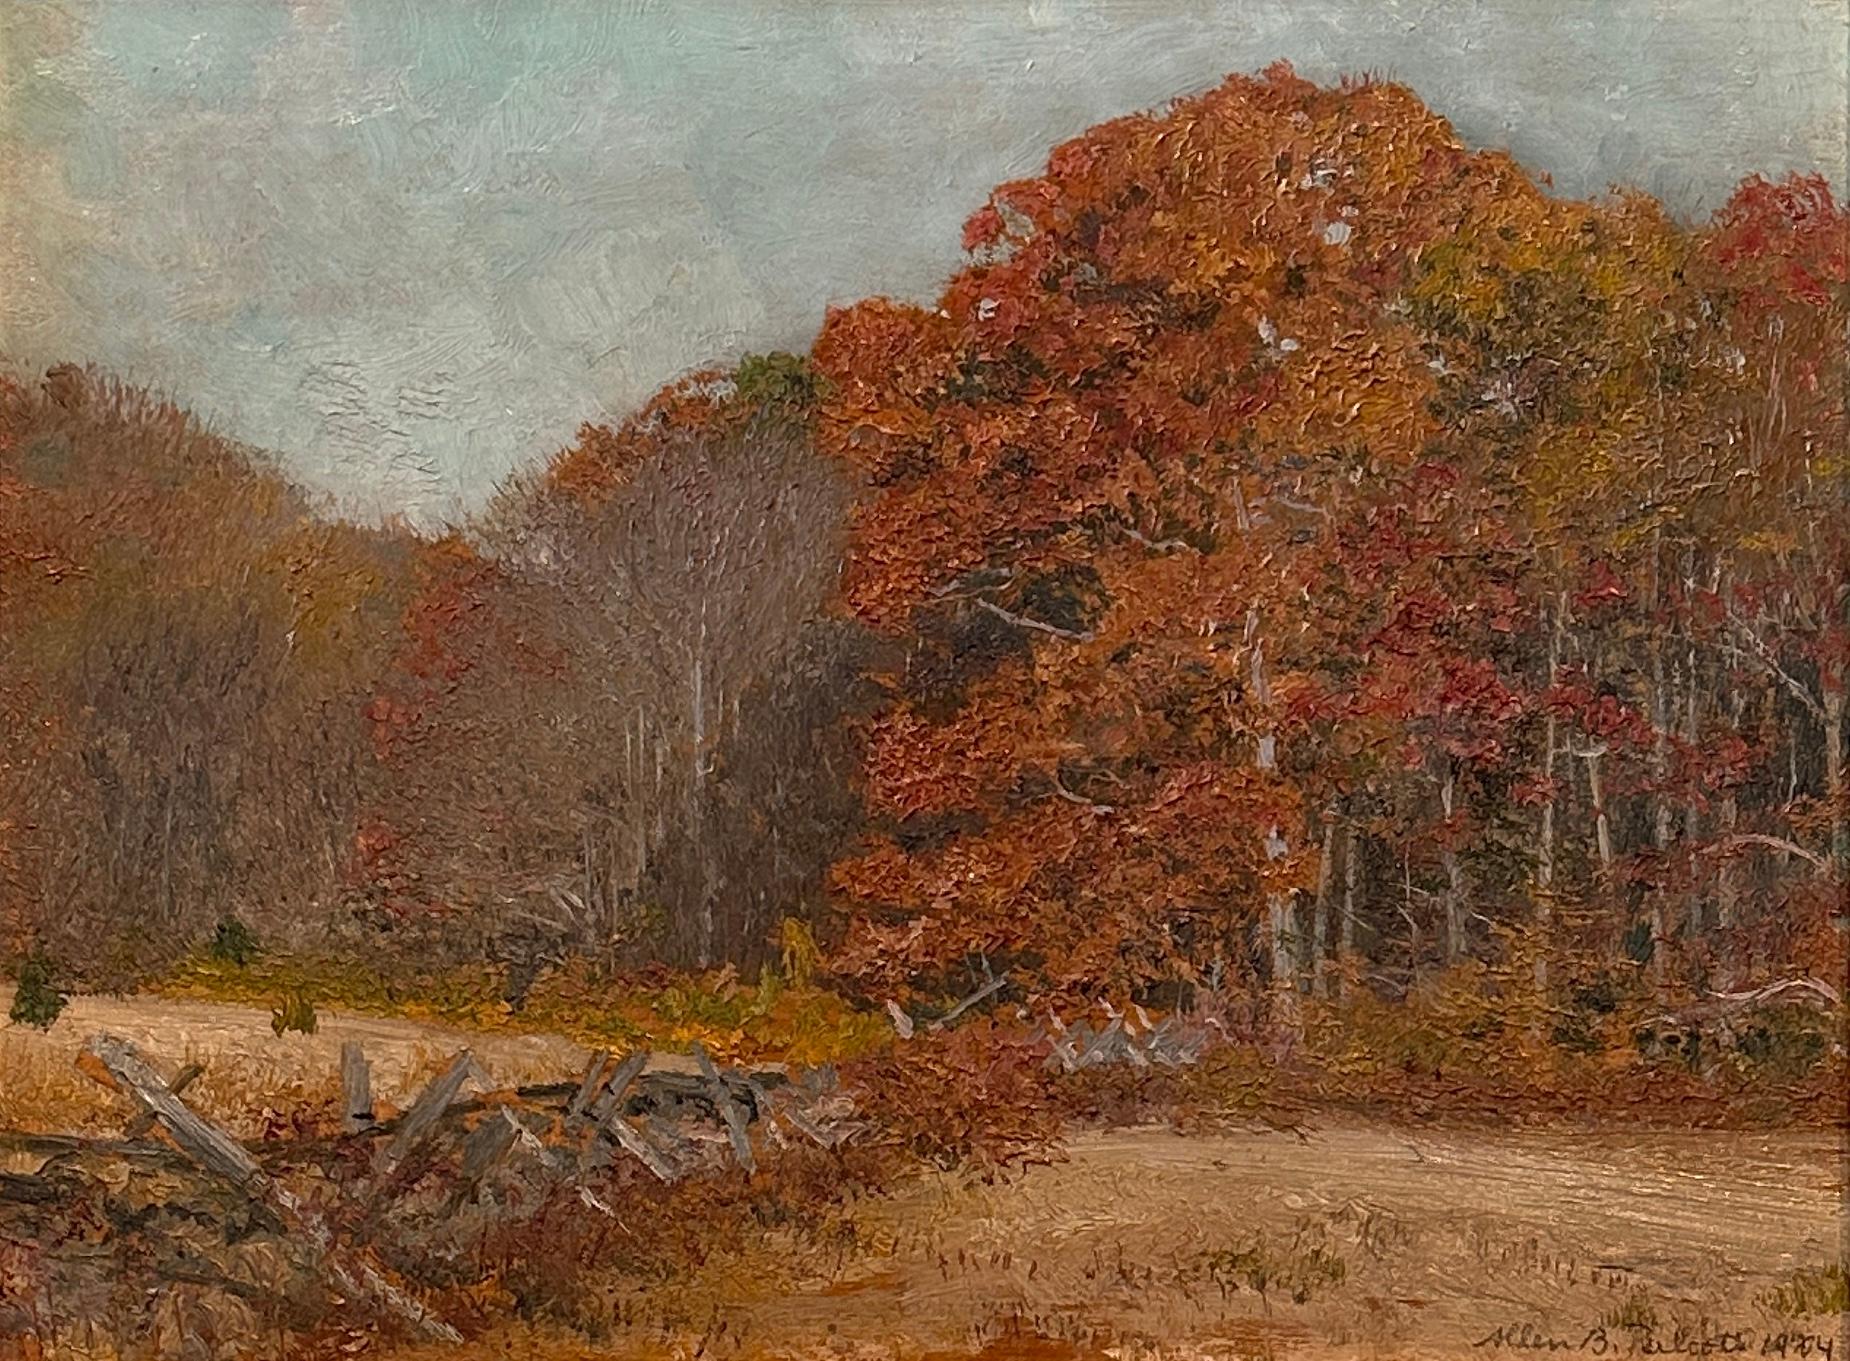 
Allen Butler Talcott (April 8, 1867 – June 1, 1908) was a prominent American landscape painter. Following three years of artistic tutelage at the esteemed Académie Julian in Paris, he returned to the United States, where he emerged as one of the